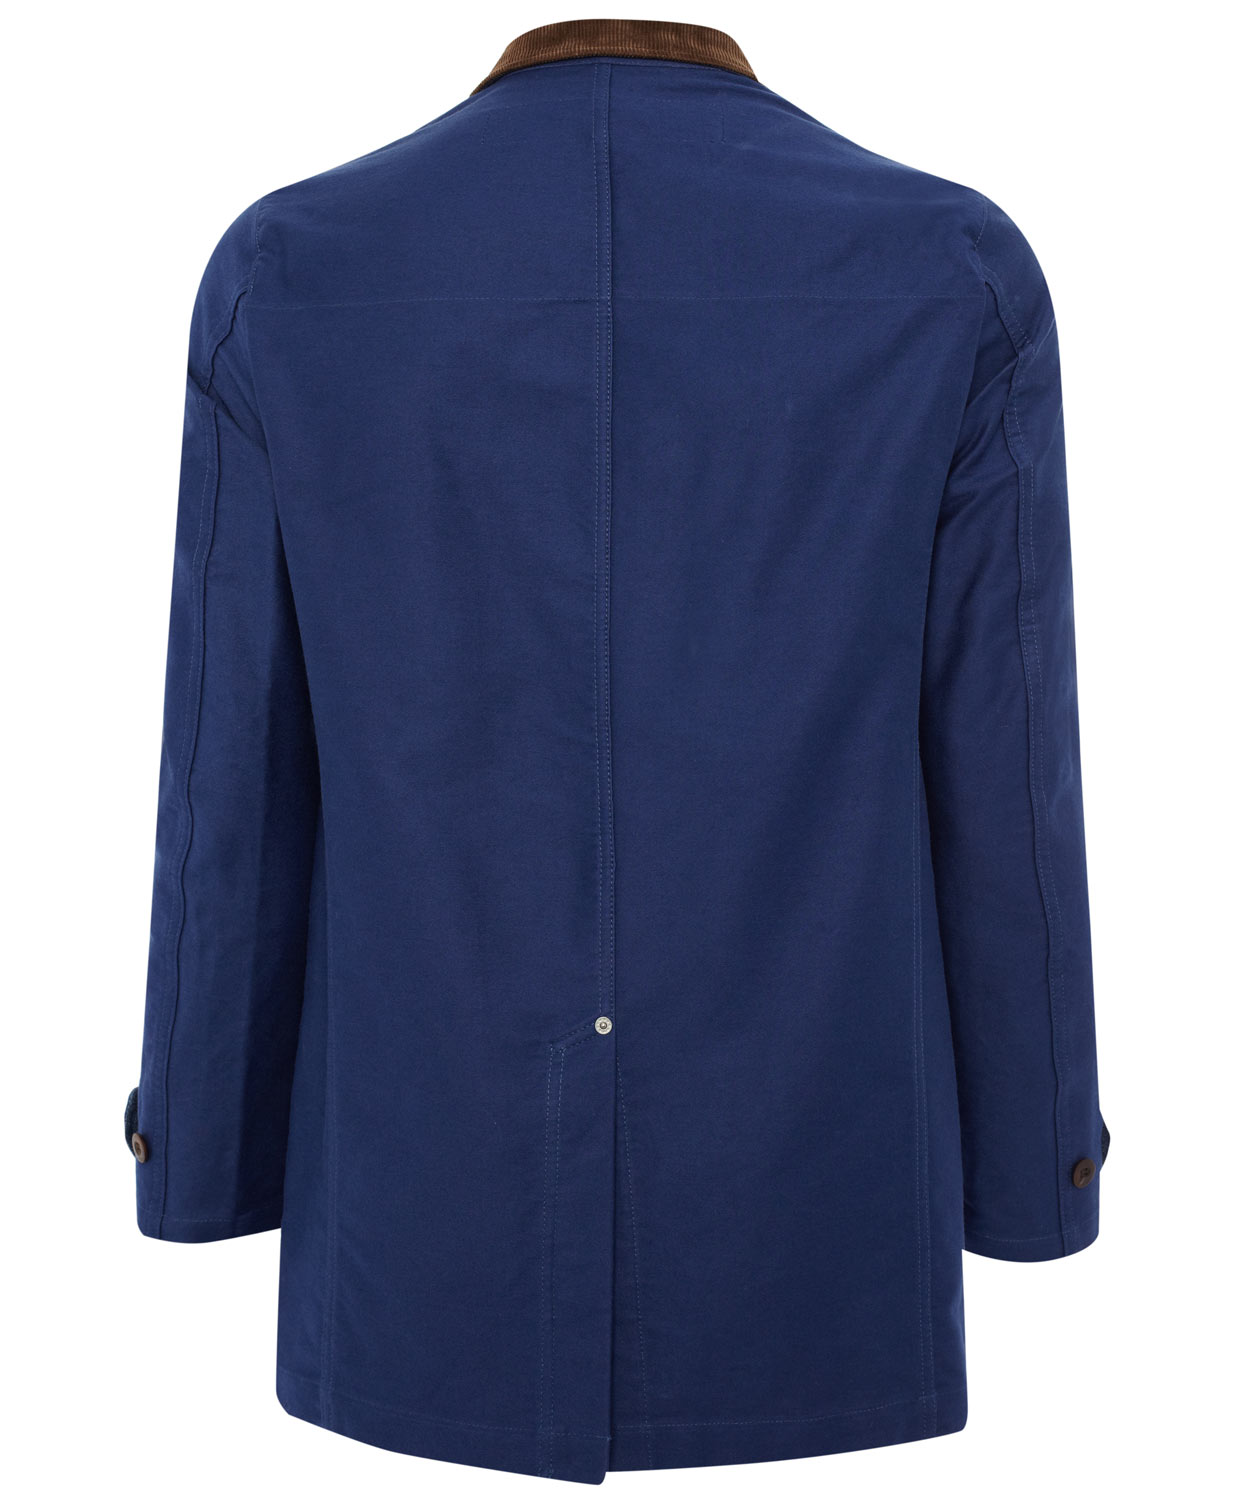 Lyst - Junya Watanabe Blue Canvas Cord Collar Jacket in Blue for Men